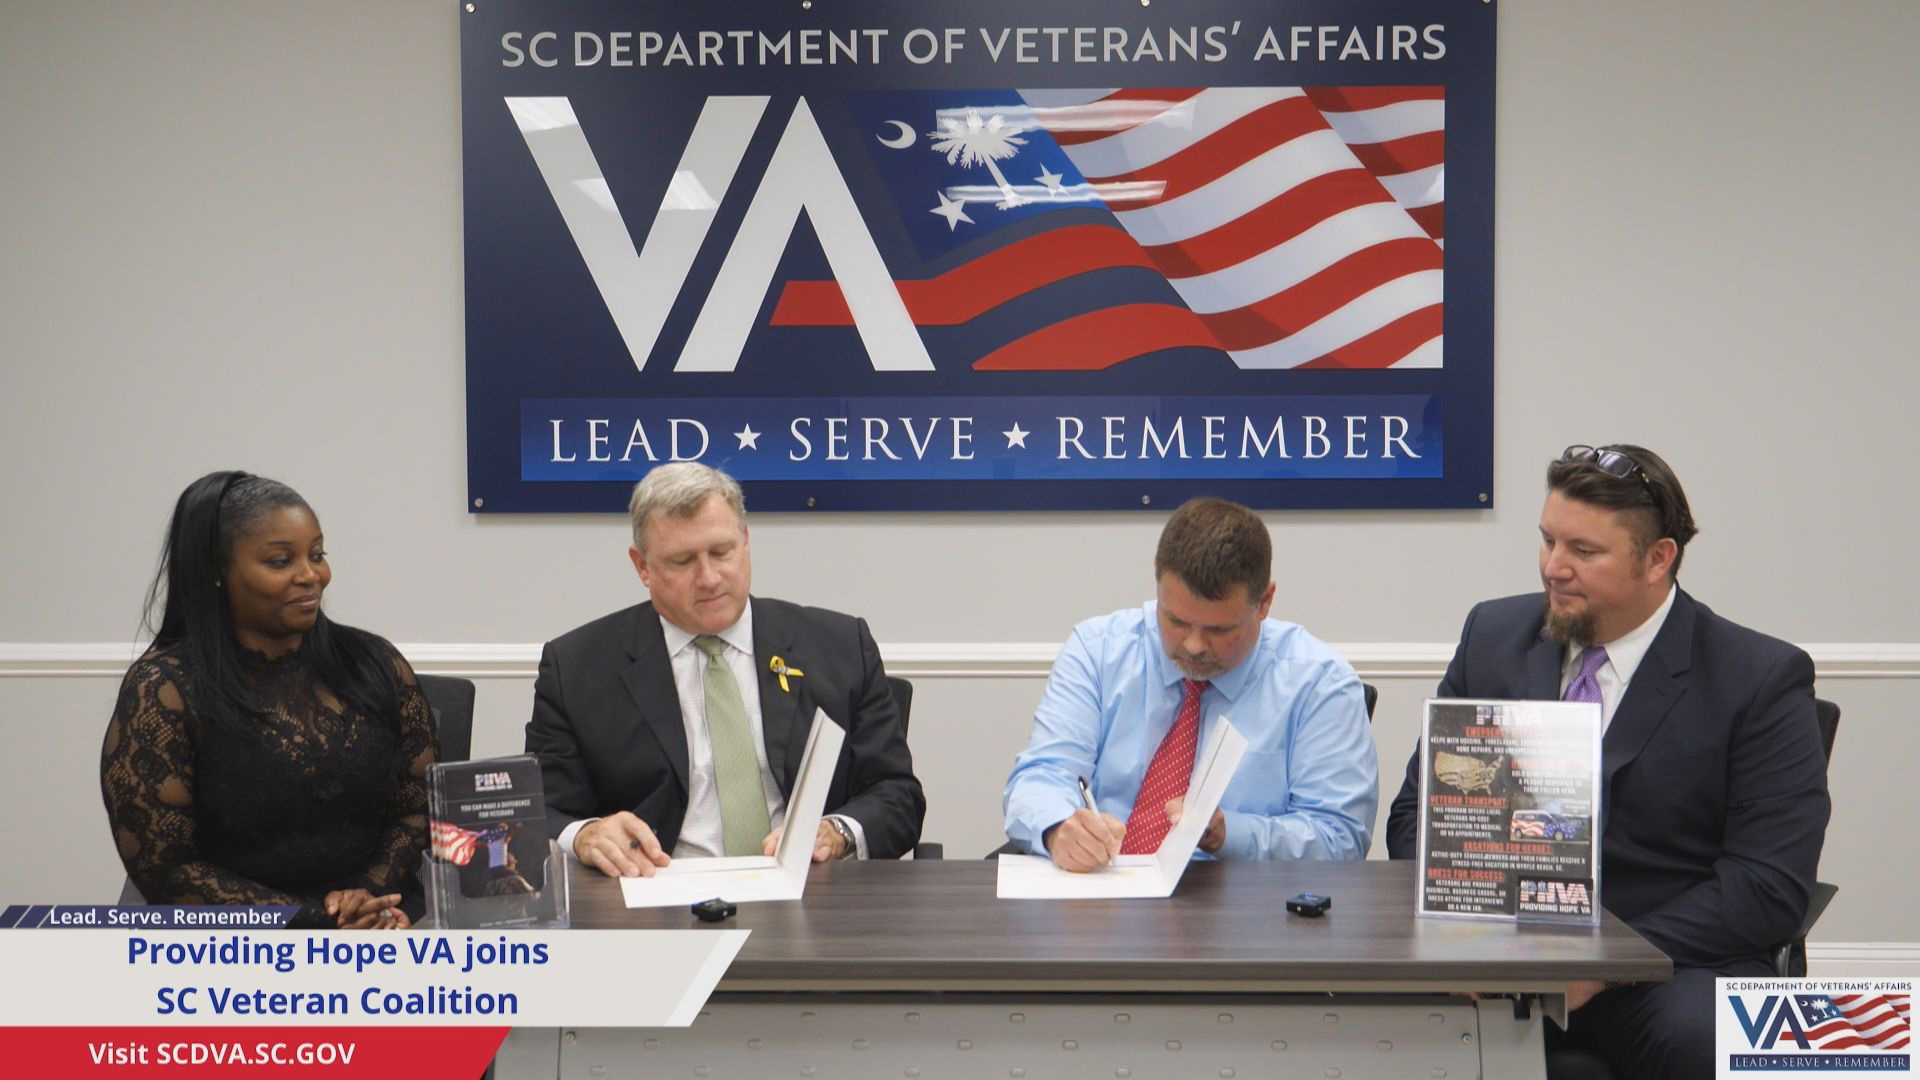 Providing Hope VA’s mission is to support Veterans by developing an understanding, caring, and compassionate environment to ensure their welfare.